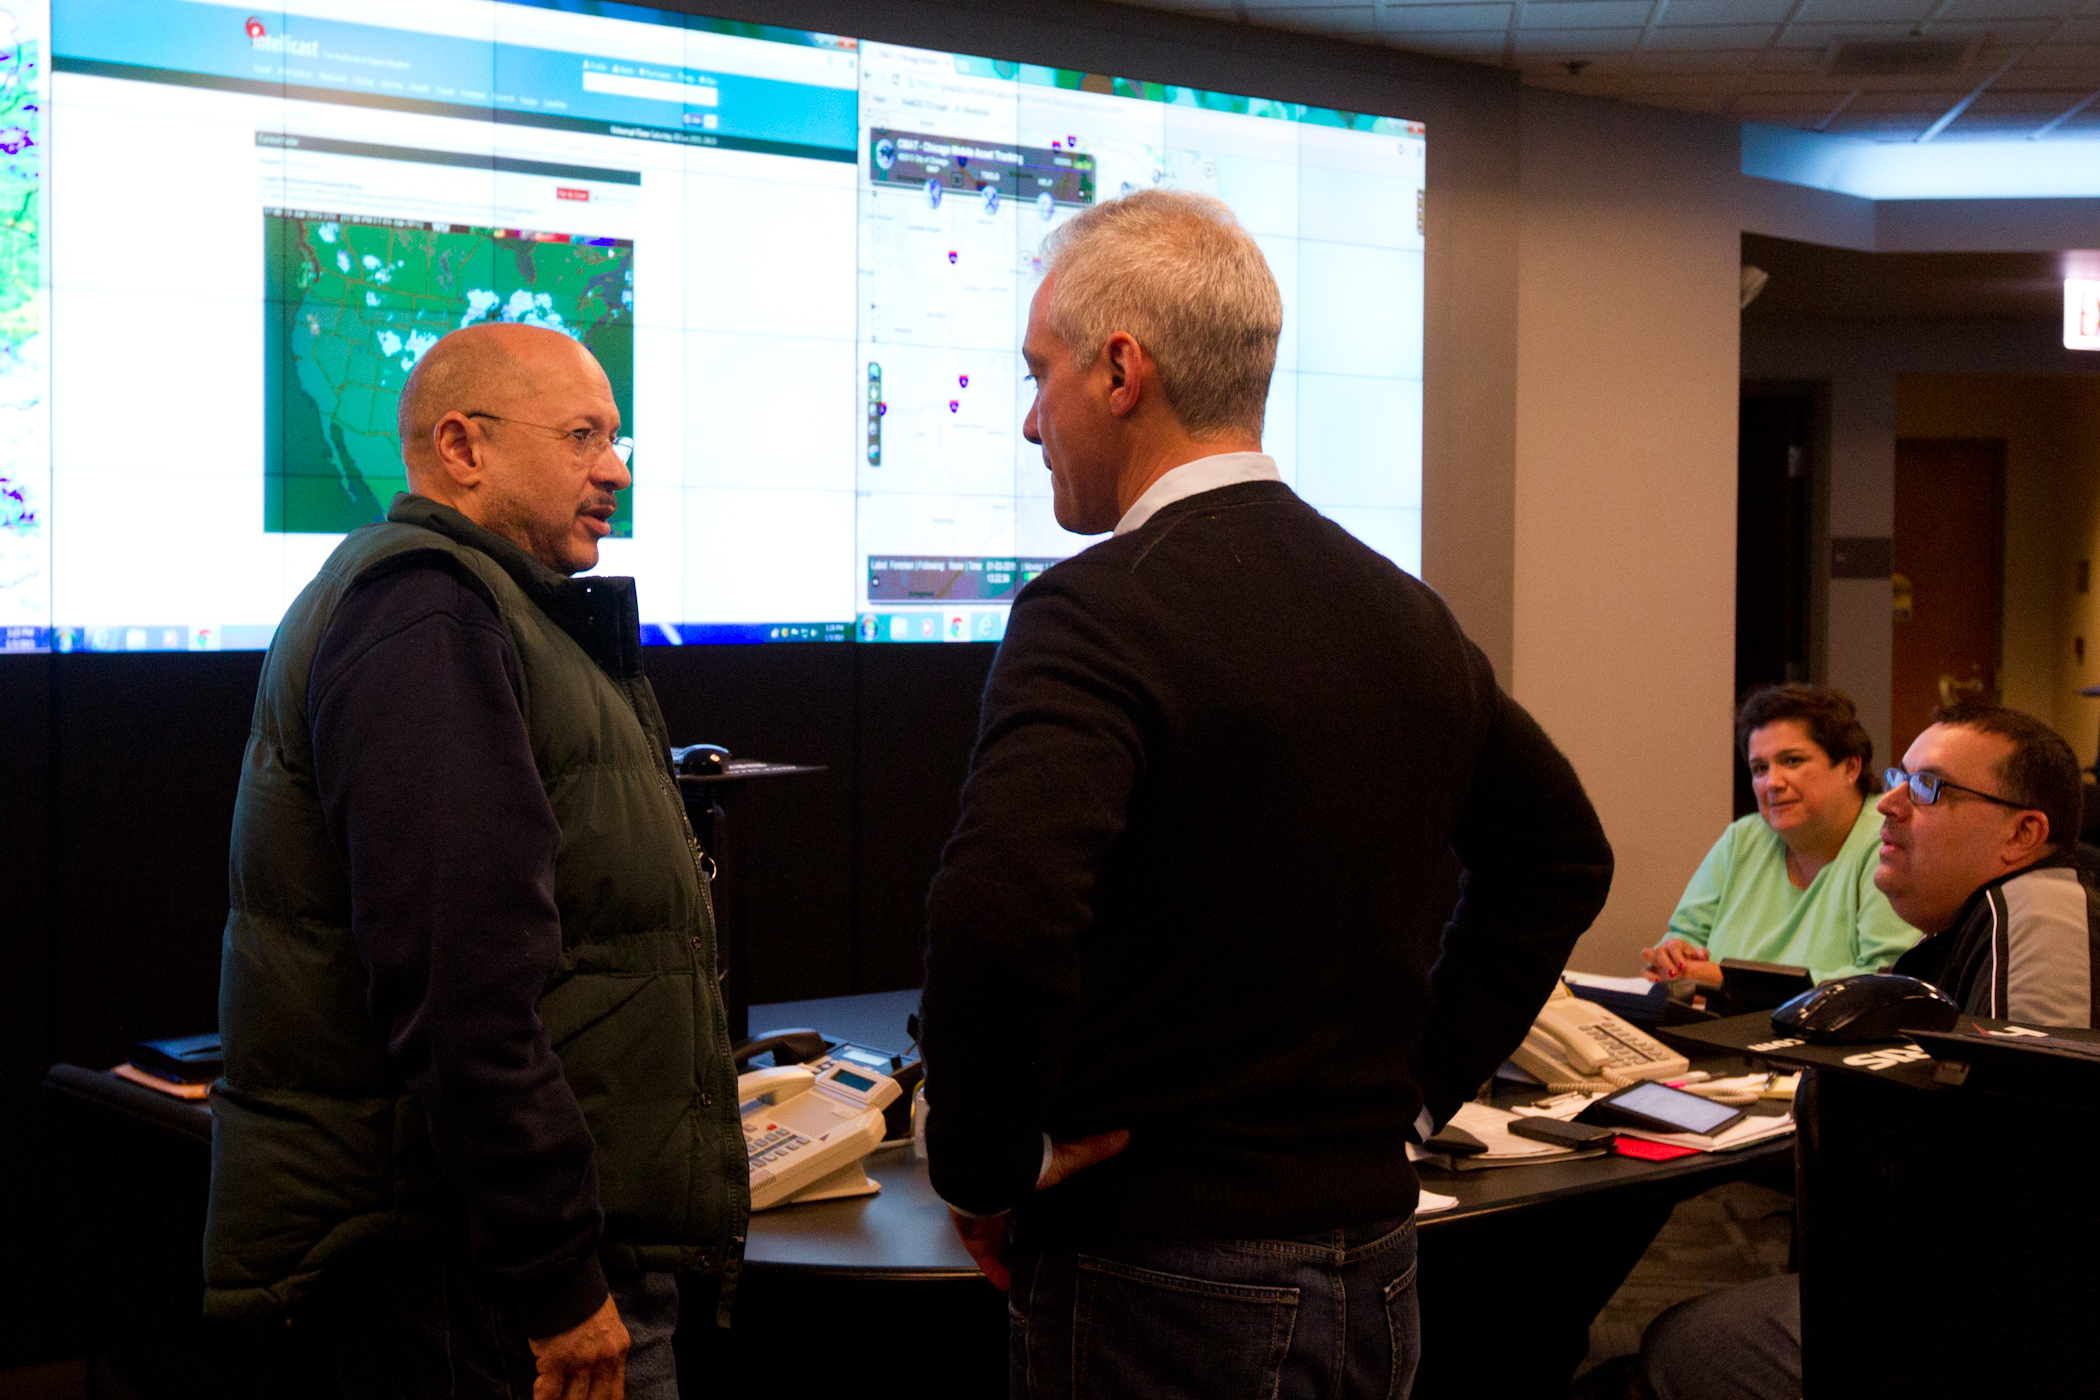 Photo Caption: Mayor Emanuel briefed on snow and ice removal operations.